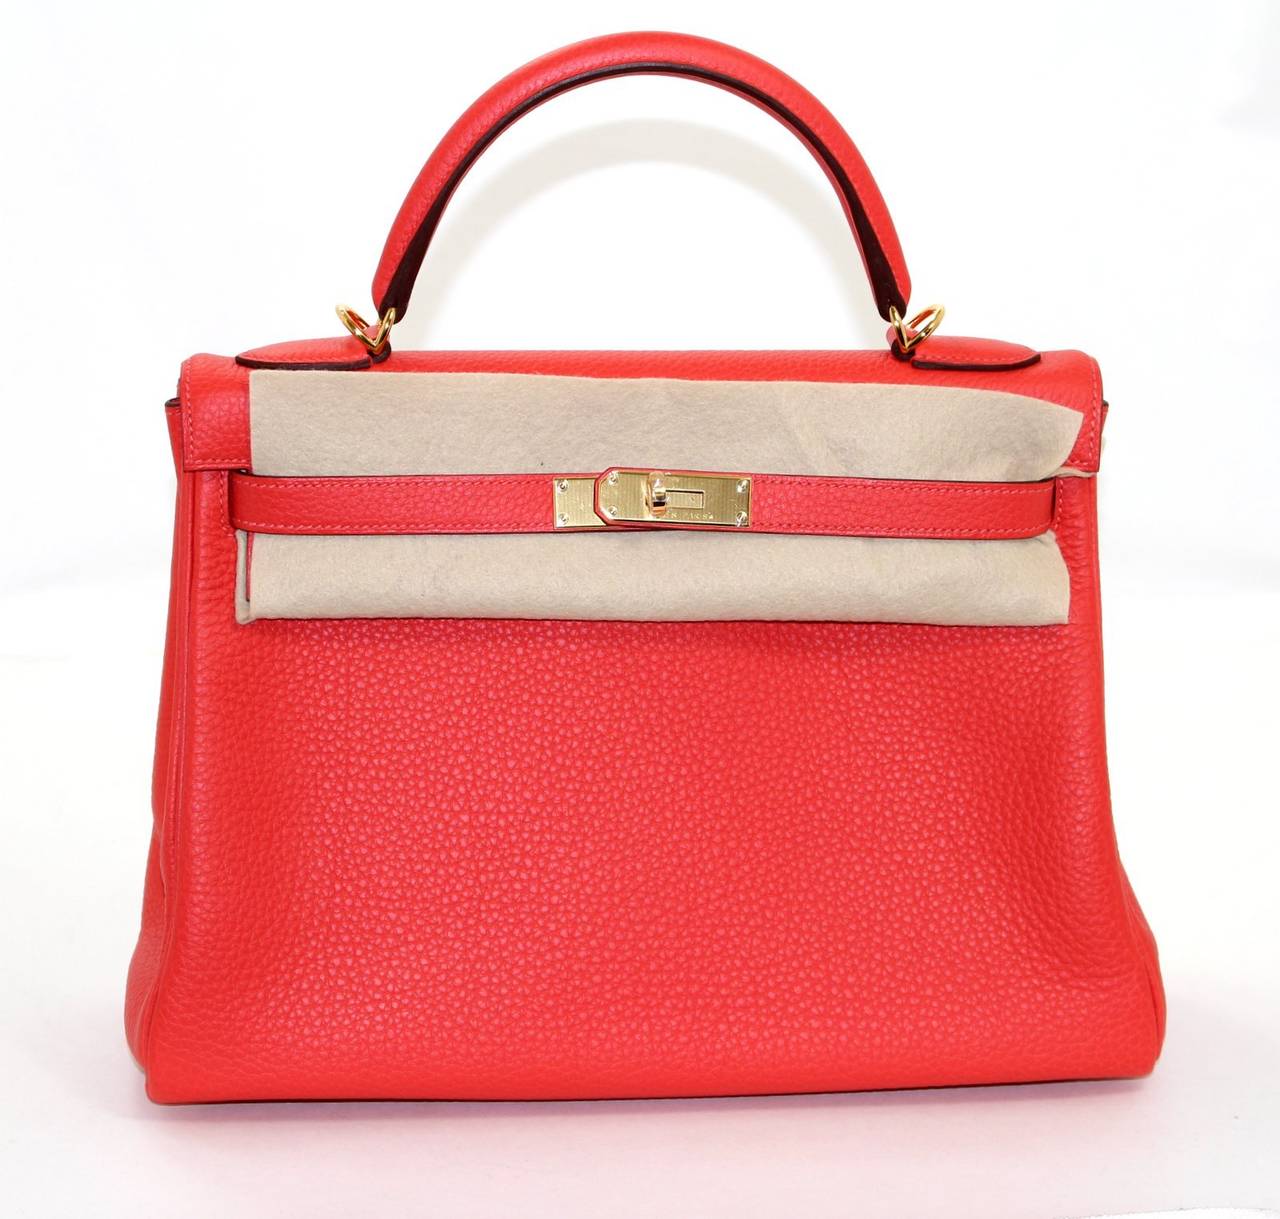 Hermes Kelly Bag in Rouge Pivoine Clemence Red Leather, GHW, 32 cm